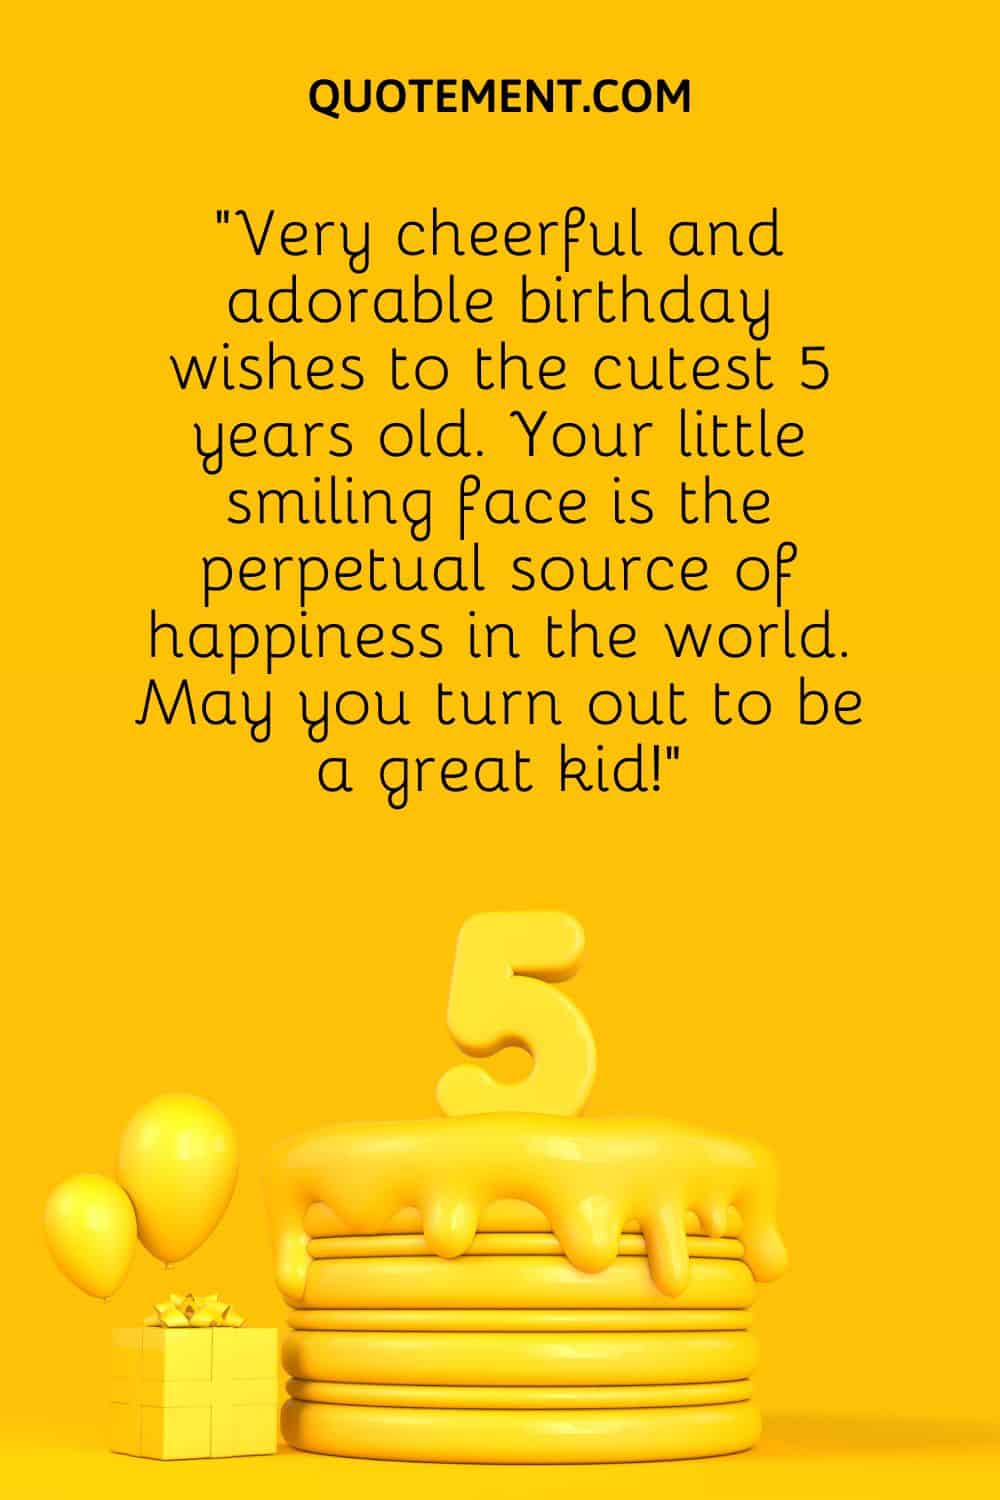 “Very cheerful and adorable birthday wishes to the cutest 5 years old. Your little smiling face is the perpetual source of happiness in the world. May you turn out to be a great kid!”